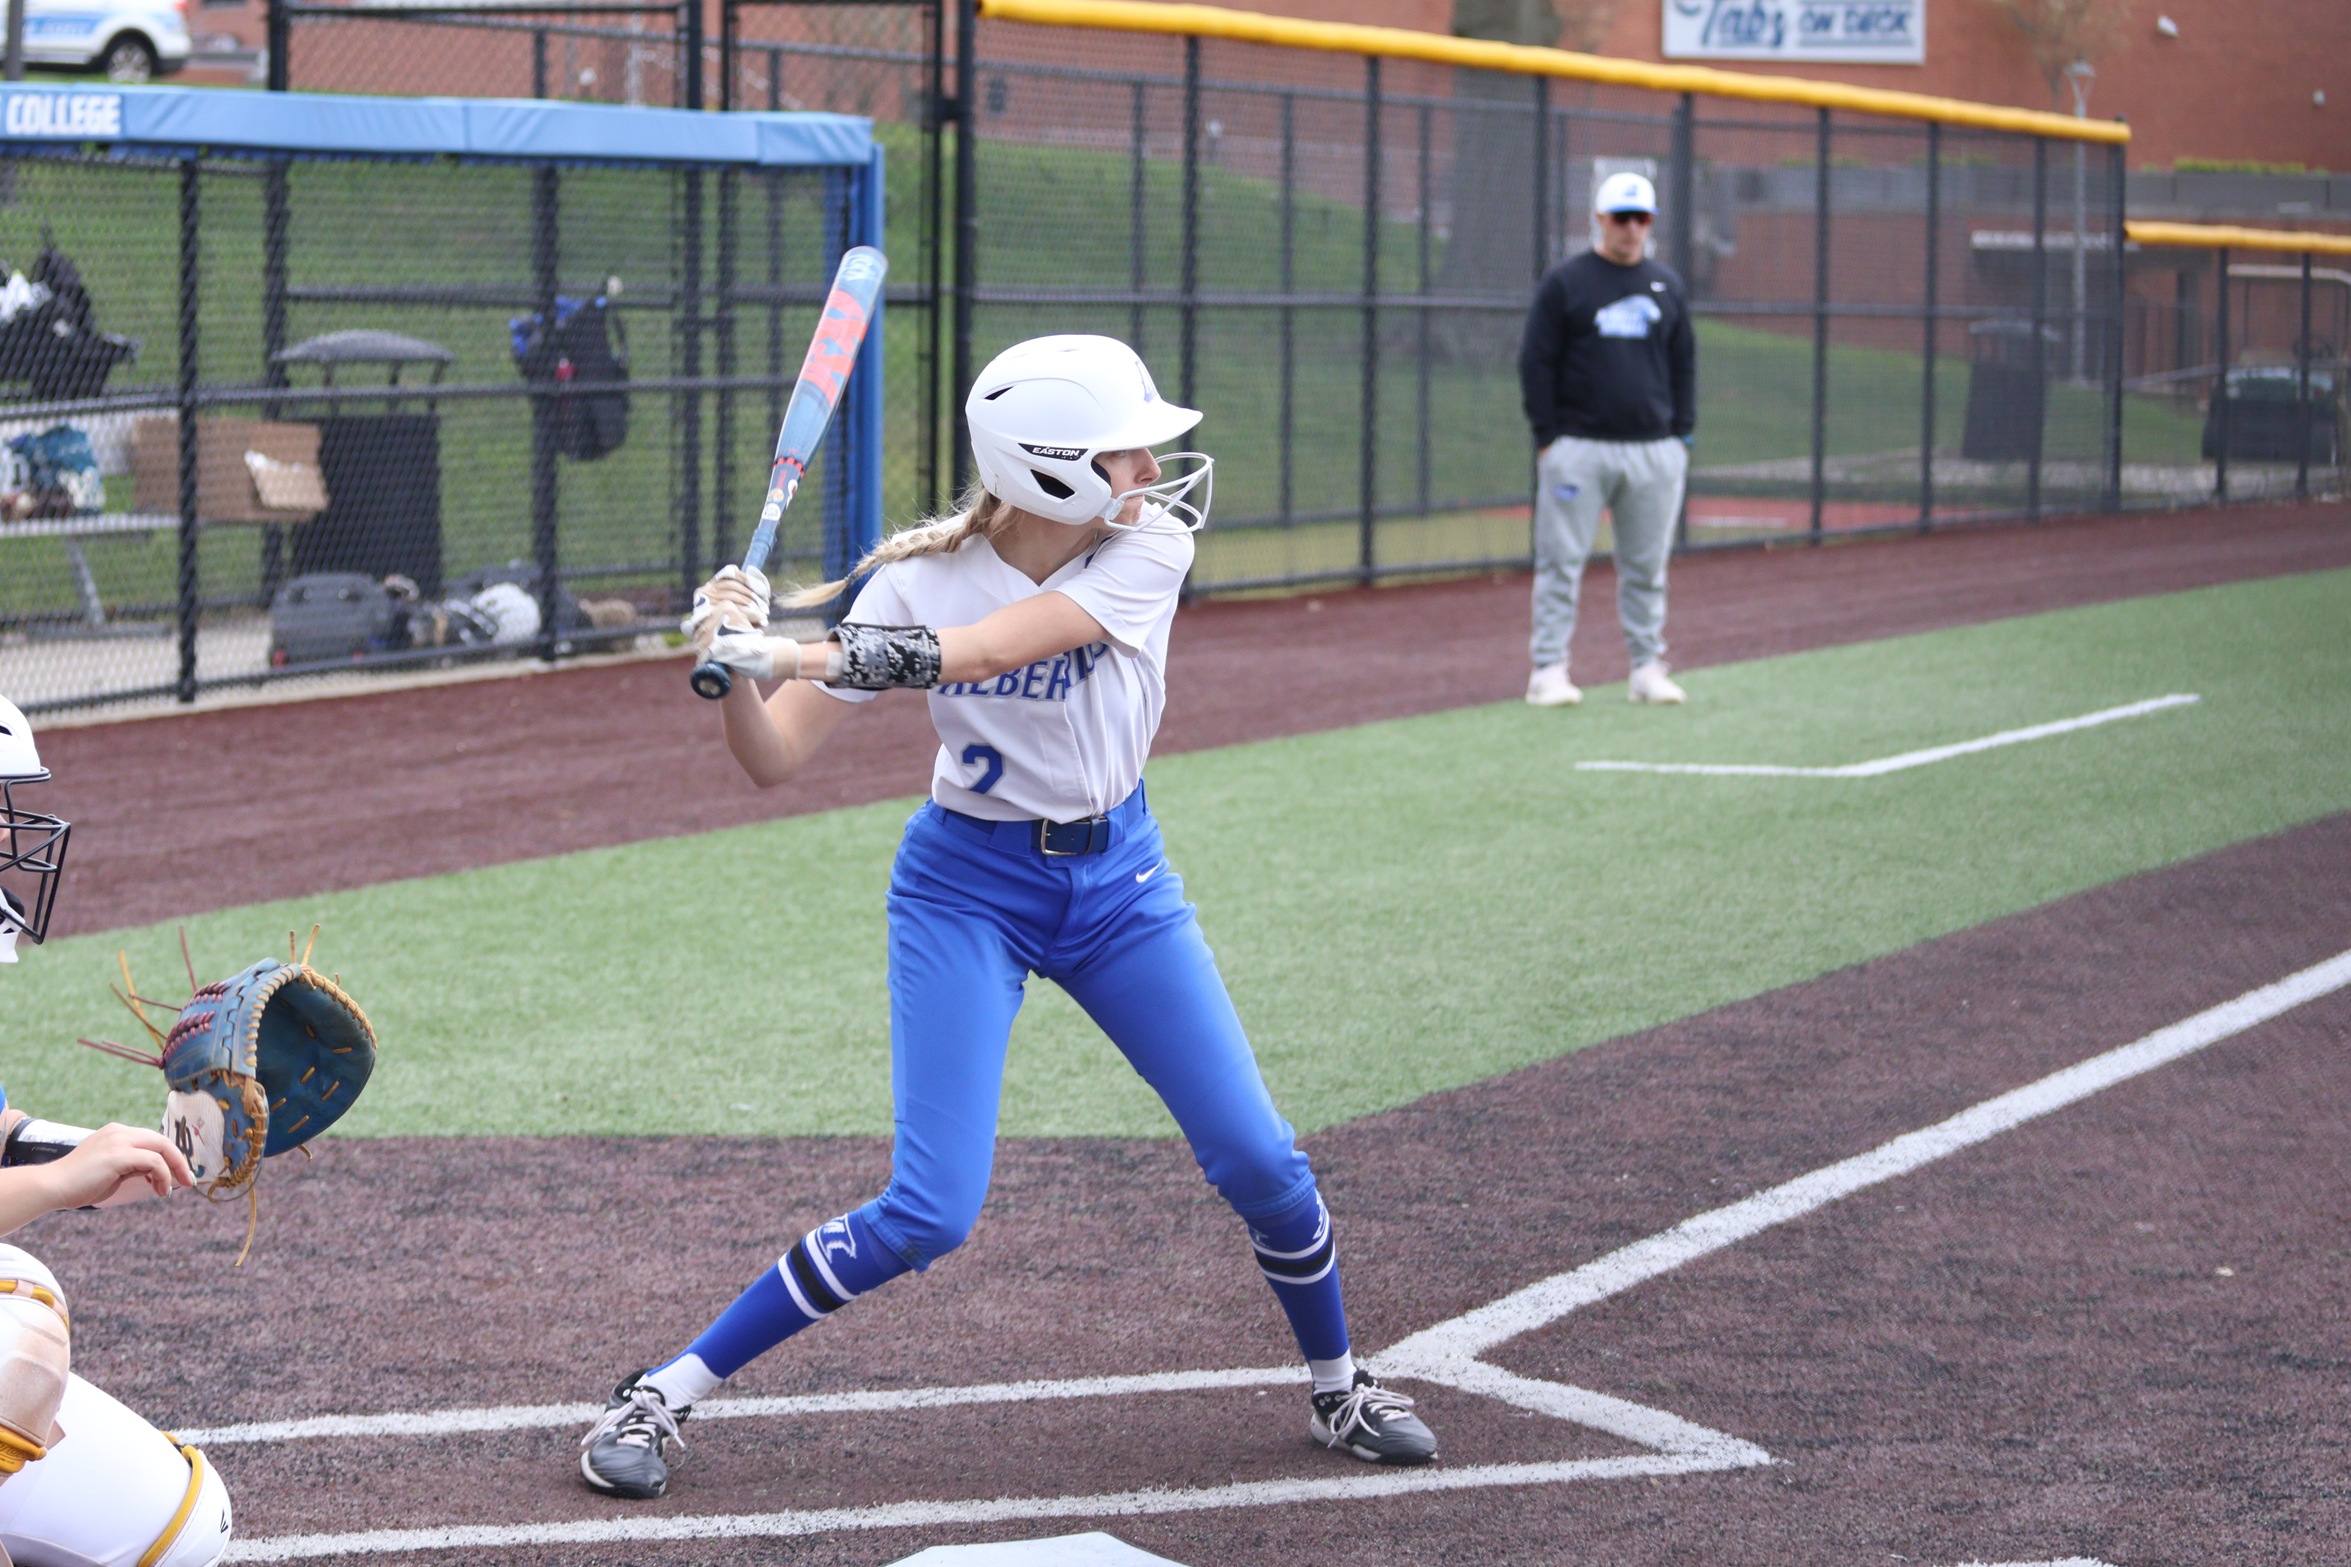 Albertus Softball Takes Game One In Thrilling Fashion, Drop Game Two To Westfield State